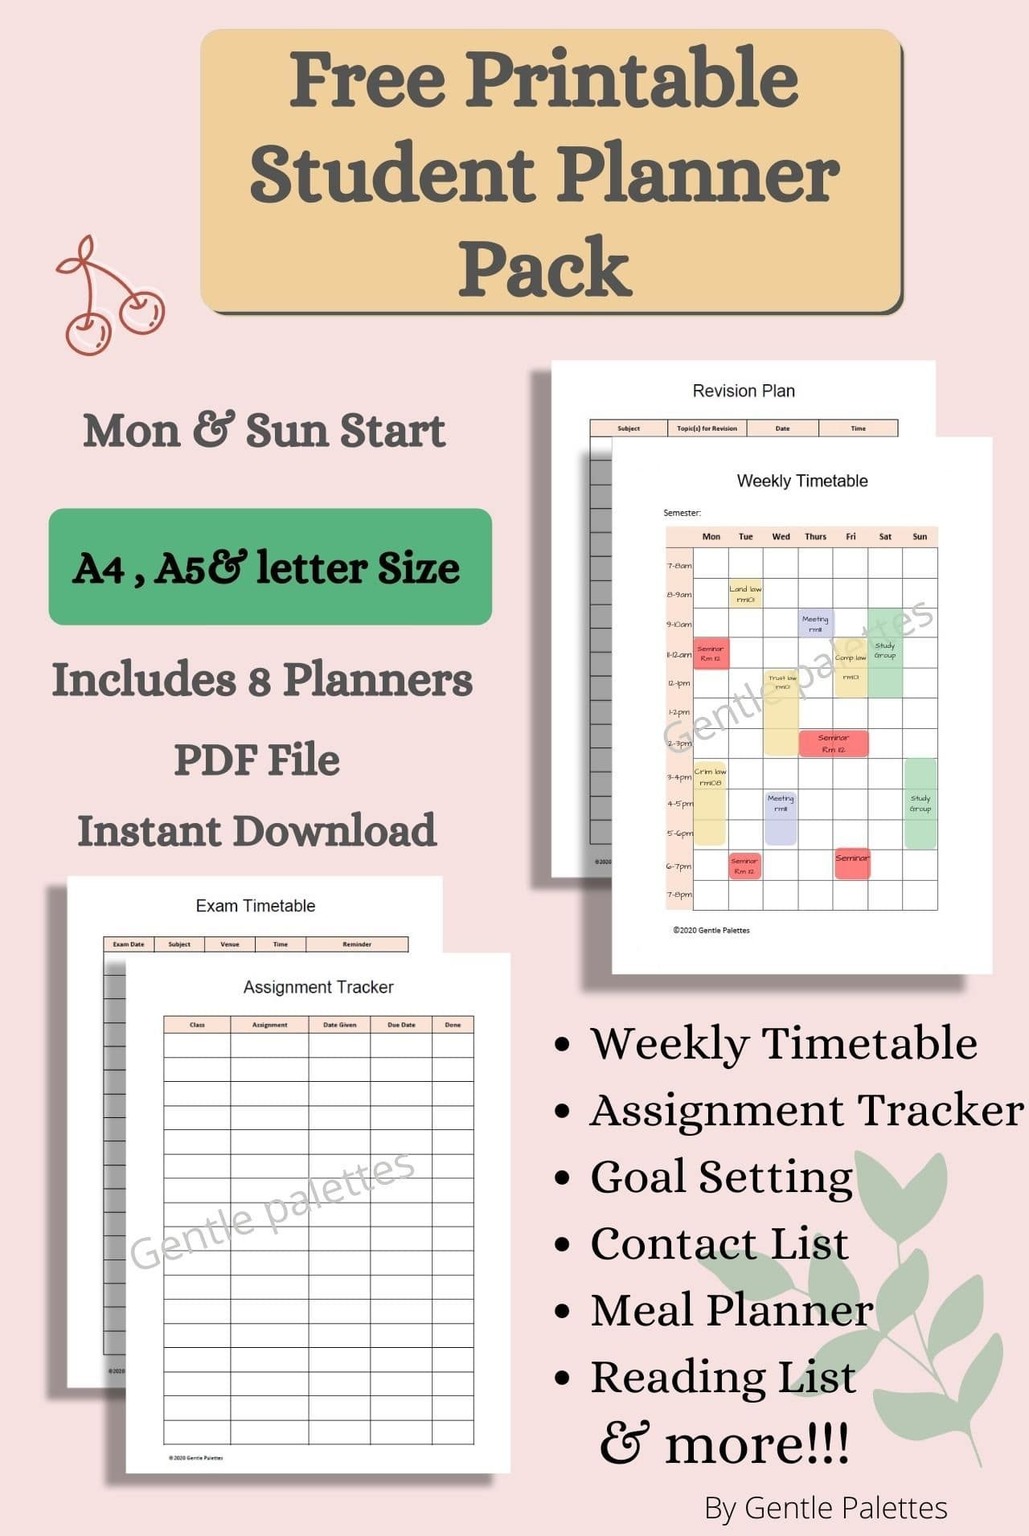 11-free-study-plan-templates-to-edit-download-and-print